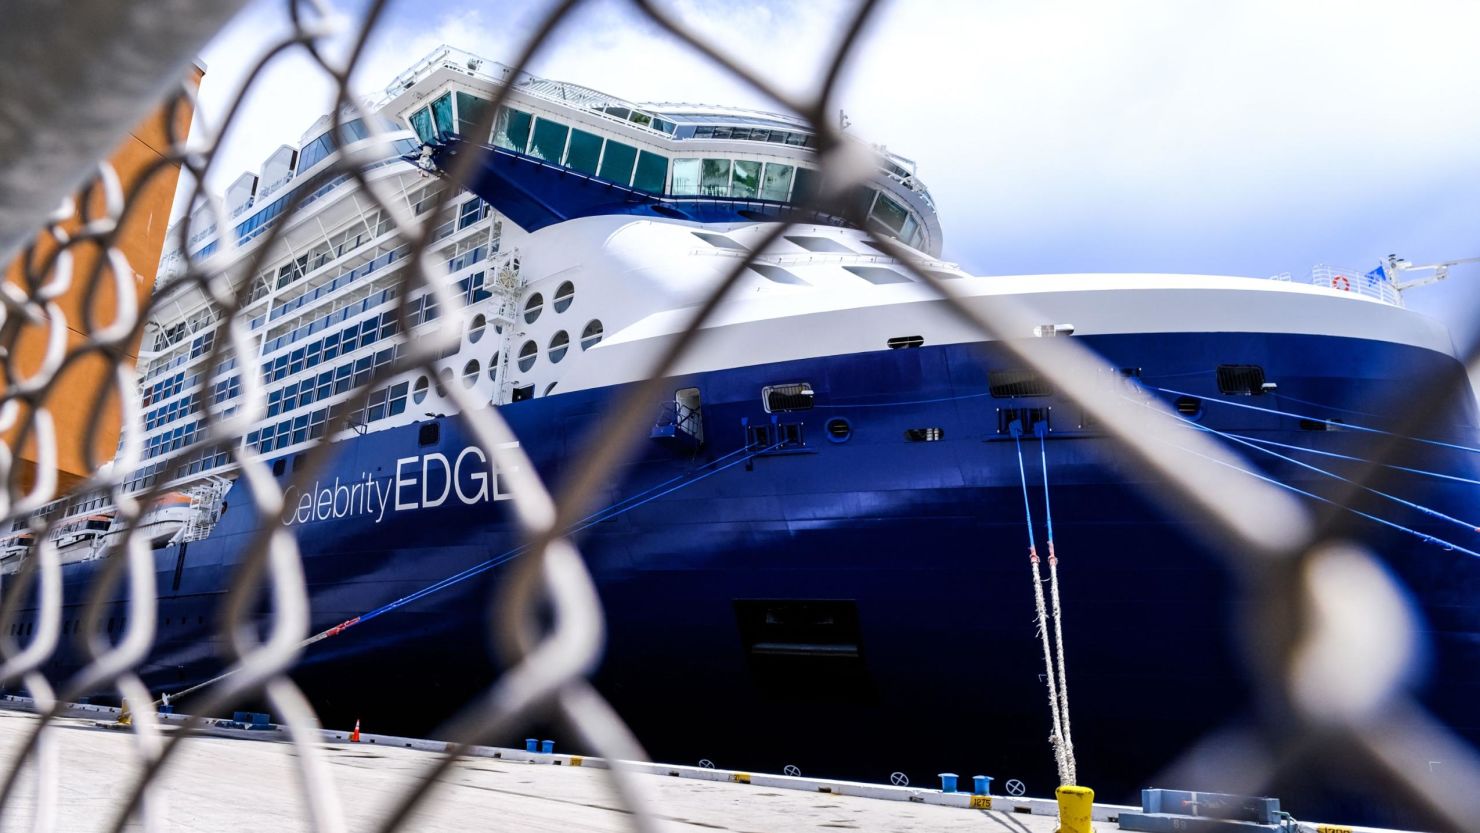 The Celebrity Edge cruise ship is docked in Fort Lauderdale, Florida, before it departs on June 26, 2021. - Celebrity Edge is the first major cruise ship to restart operations from a US port since the Covid-19 pandemic shutdown cruise travel. (Photo by Maria Alejandra CARDONA / AFP) (Photo by MARIA ALEJANDRA CARDONA/AFP via Getty Images)